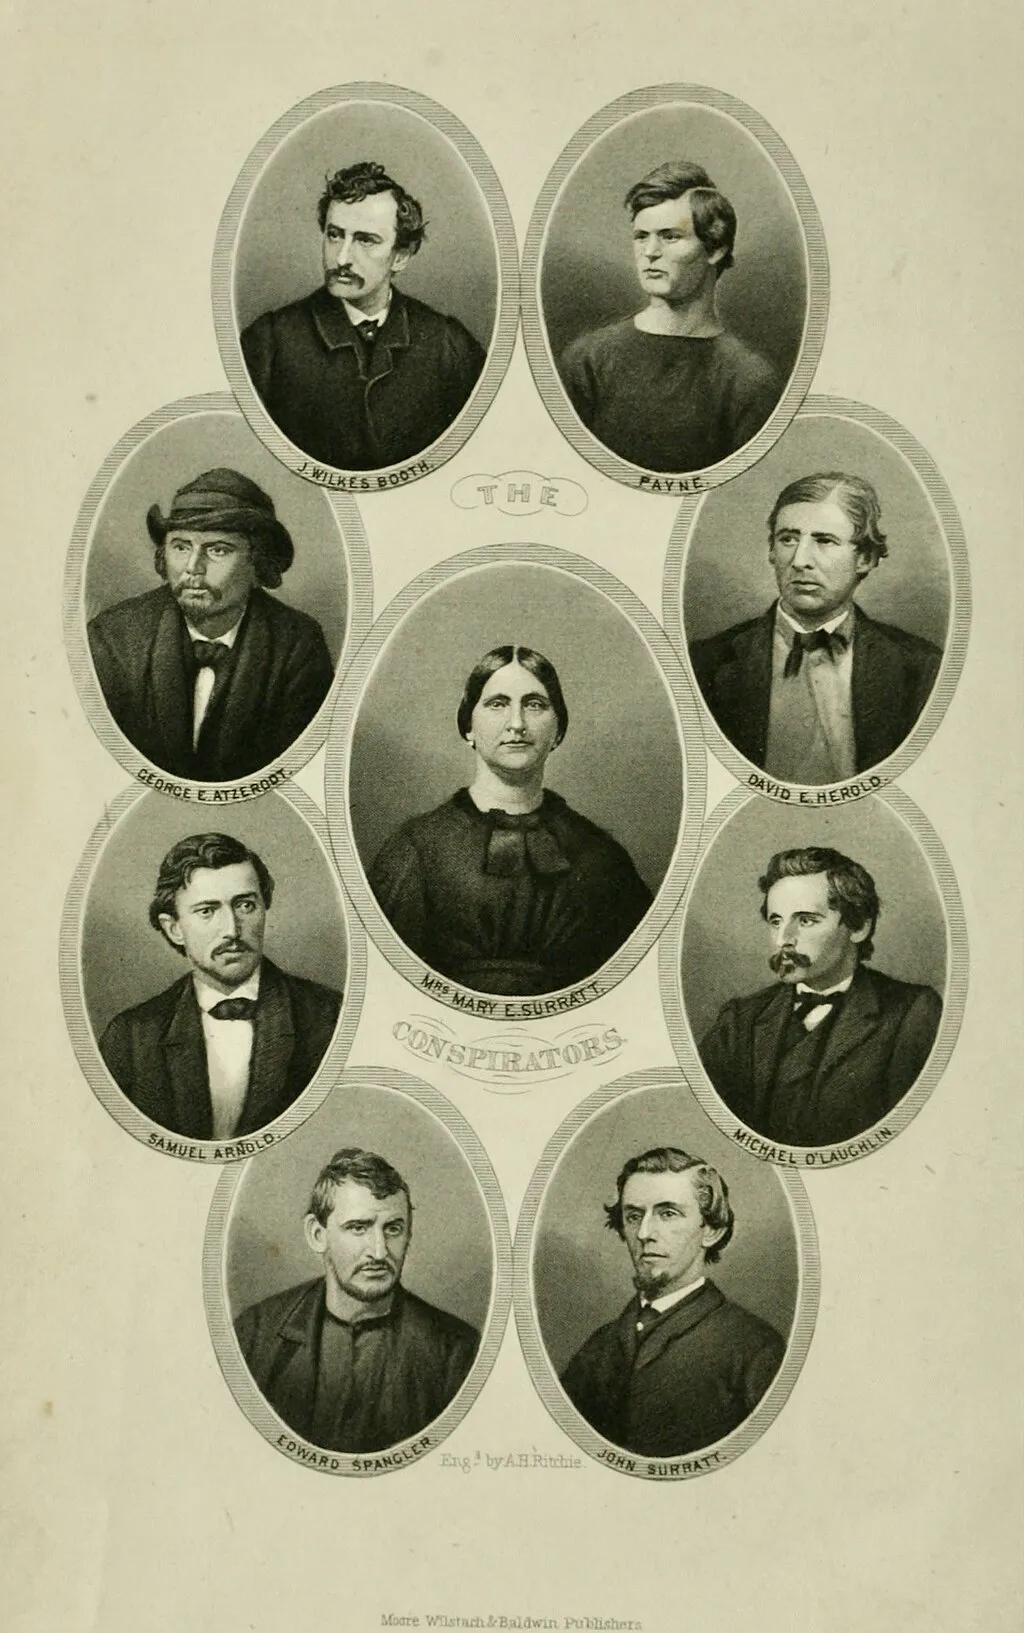 Illustrations of the co-conspirators